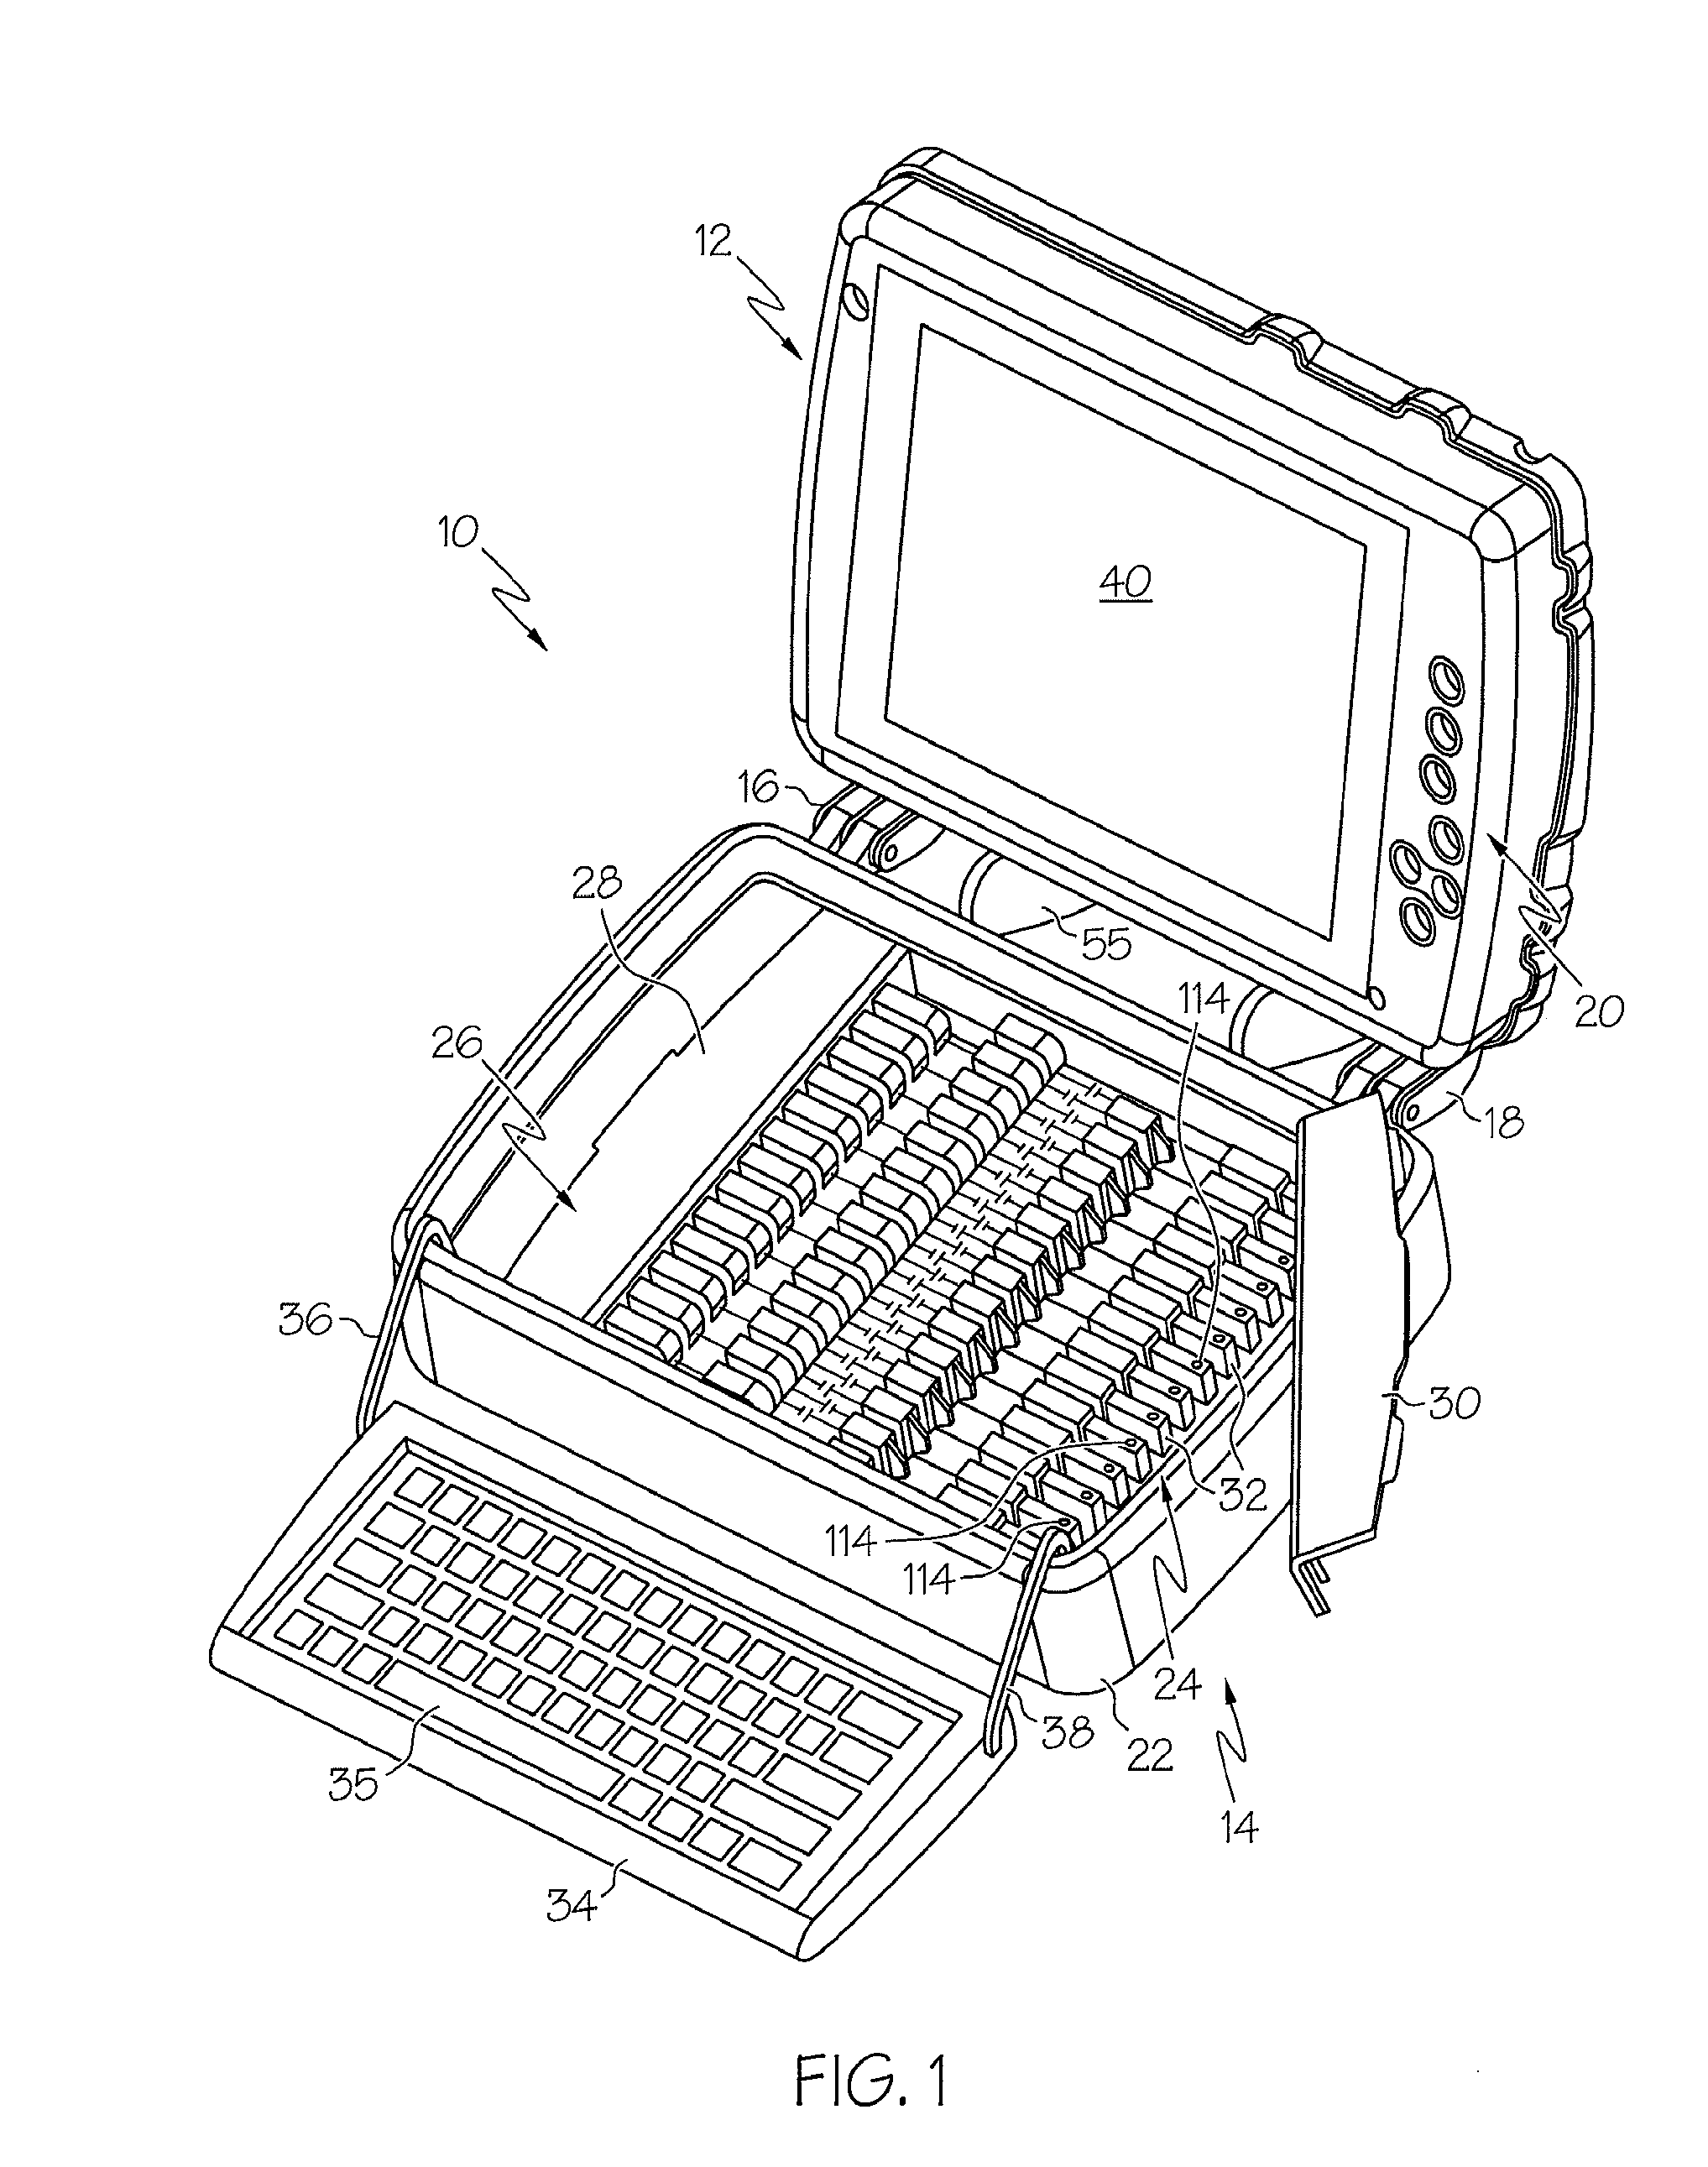 Method and Apparatus for Obtaining Forensic Evidence from Personal Digital Technologies